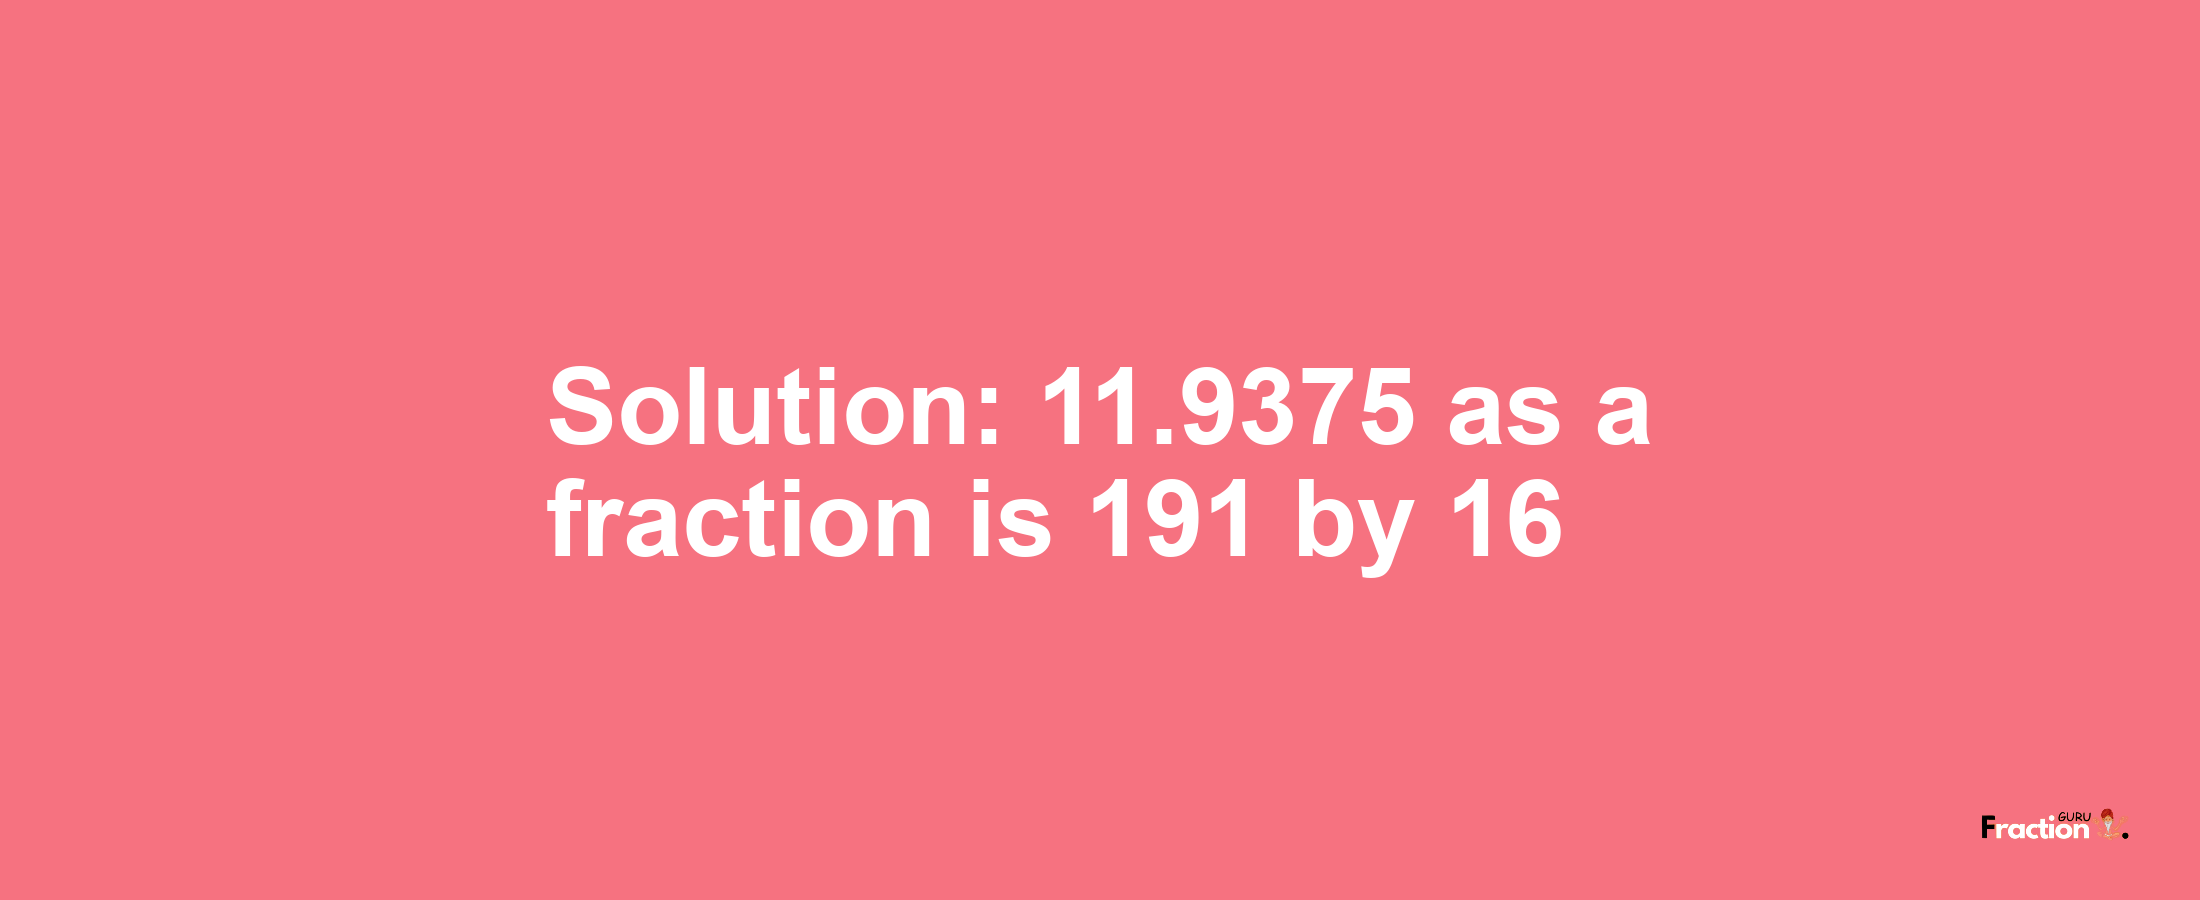 Solution:11.9375 as a fraction is 191/16